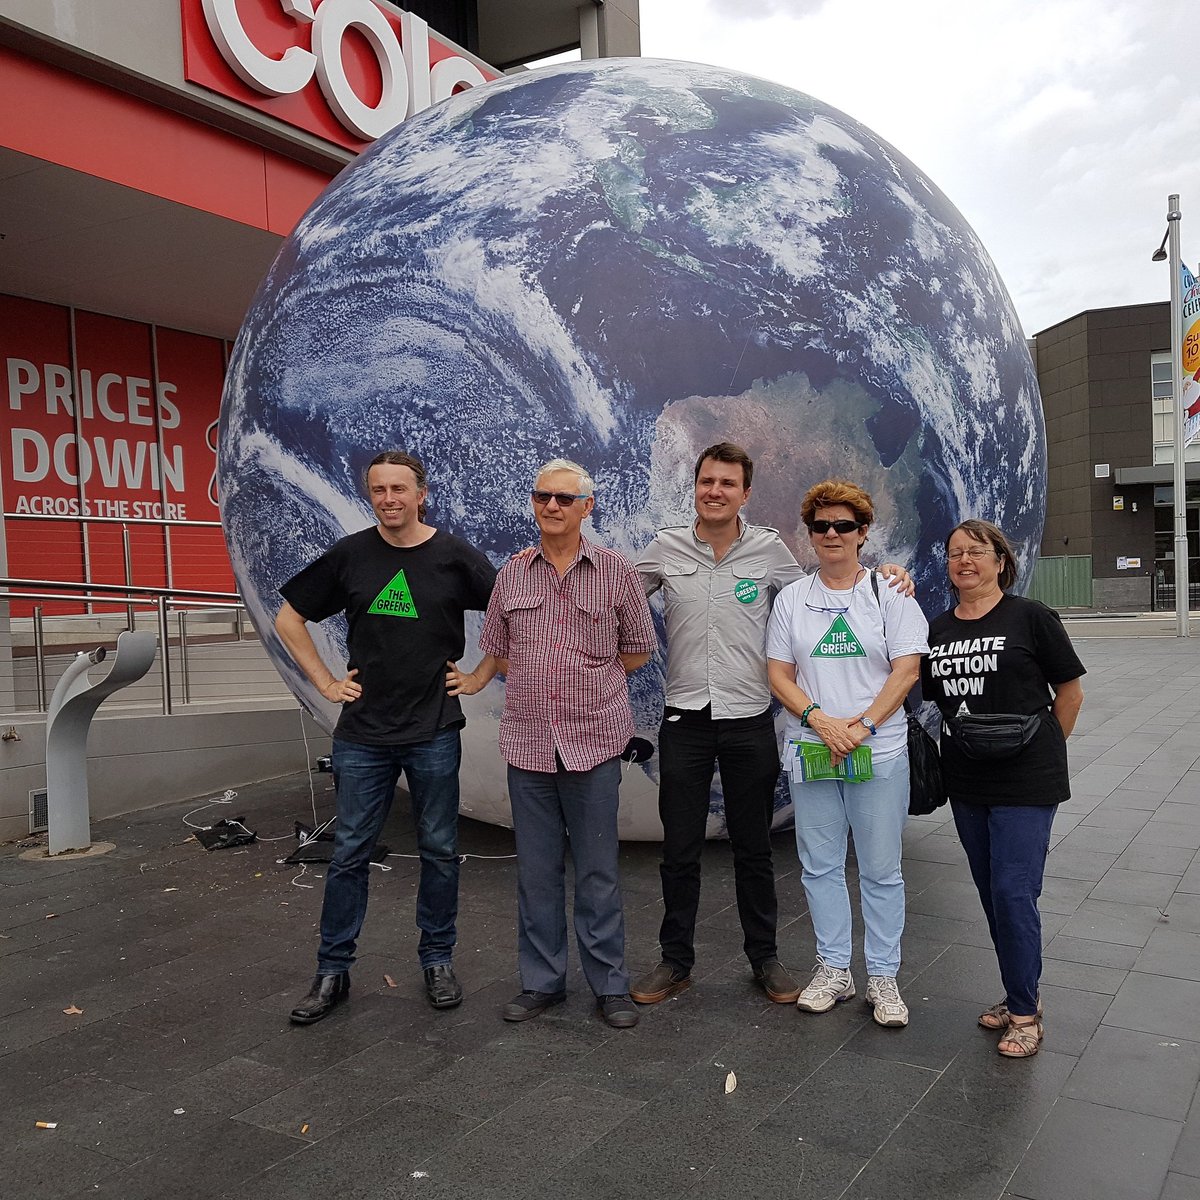 WEST RYDE - EARTH BALL EVENT
The earth ball event today (Saturday, 02 December 2017) was the impetus for a massive Greens leafletting of the West Ryde Marketplace, with Jeremy Buckingham, to local area pedestrians and houses. #REG #Greens #Bennelong #JustinAlick #JeremyBuckingham